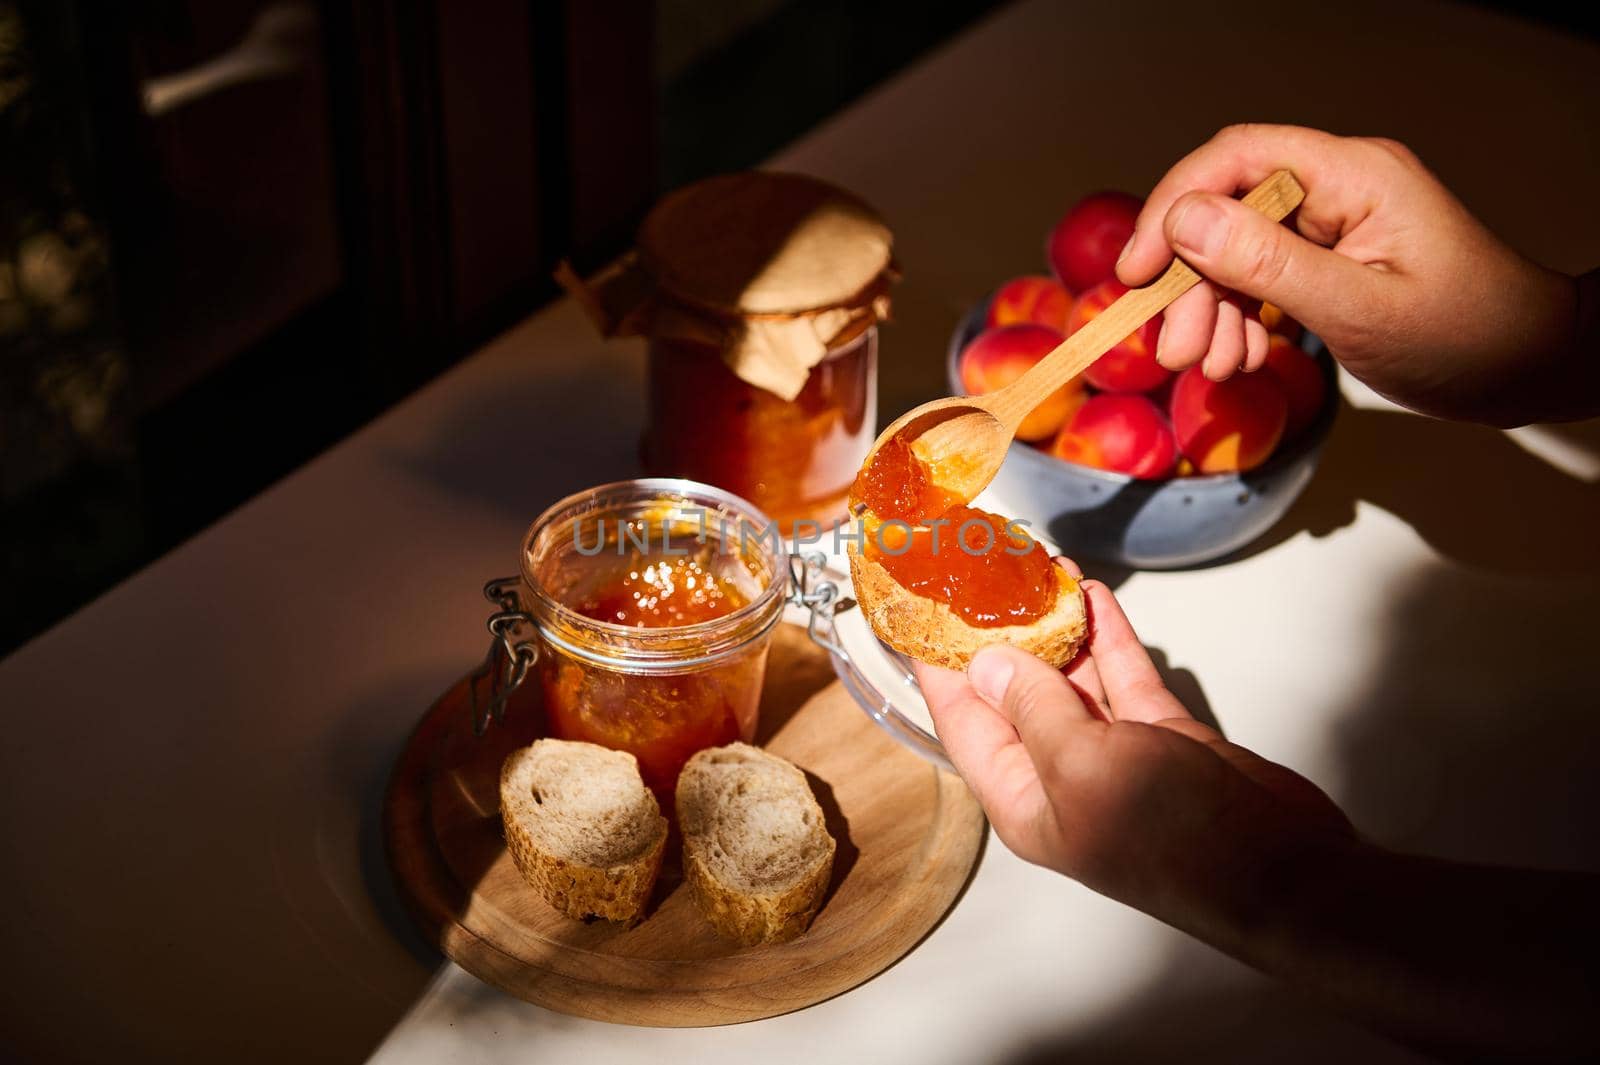 Daylight falls on the table. Hands using wooden spoon, spreads a homemade confiture on the bread. Rustic still life composition with fresh ripe apricots in a blue bowl and a jar with marmalade and jam